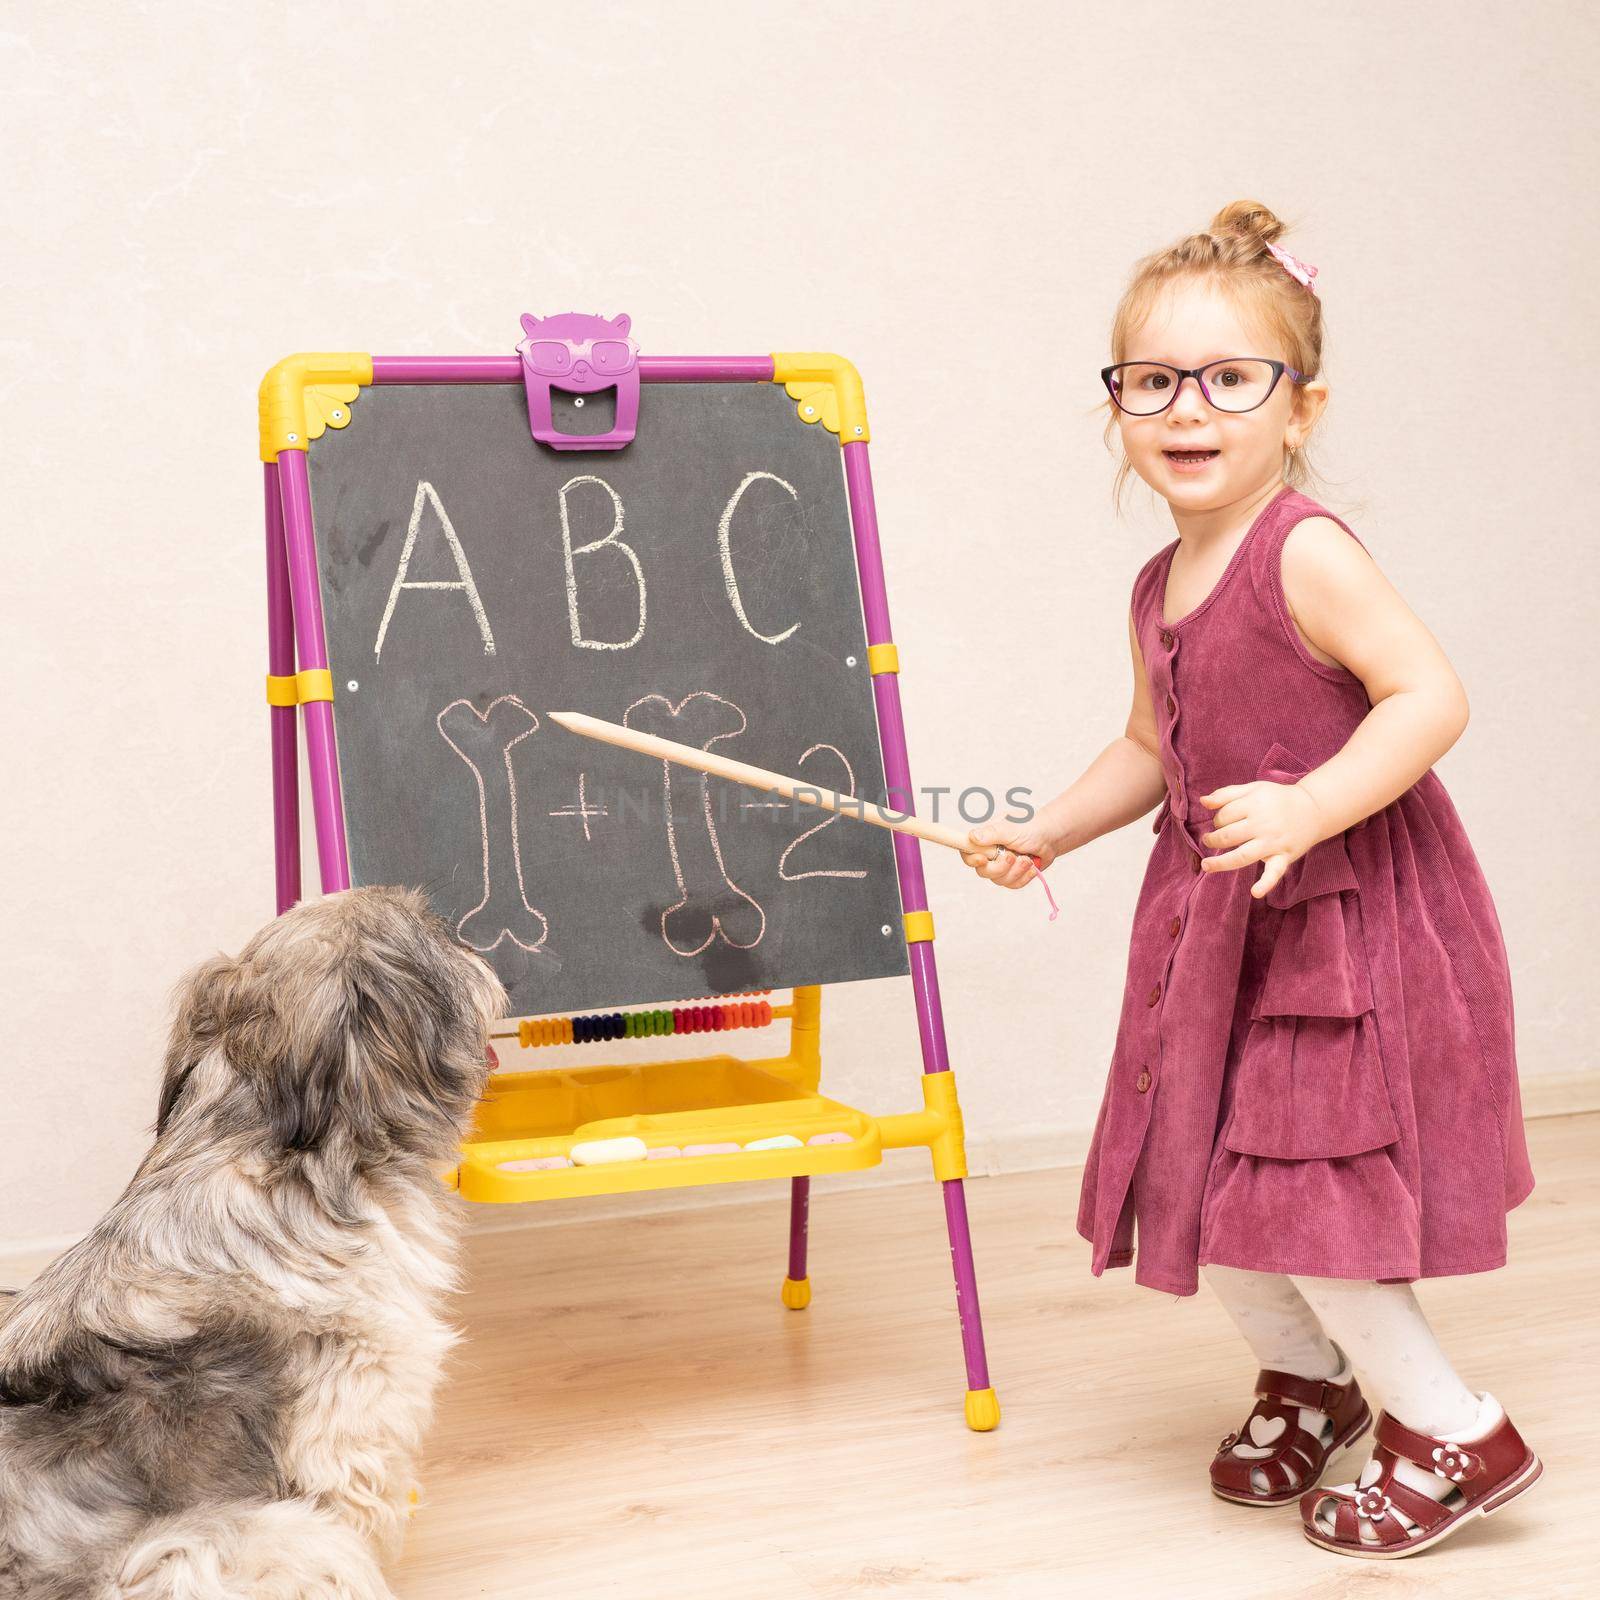 little girl teacher plays with her dog in school and shows her English letters . The dog sits on its hind legs and listens carefully. The girl remembers the letters and smiles